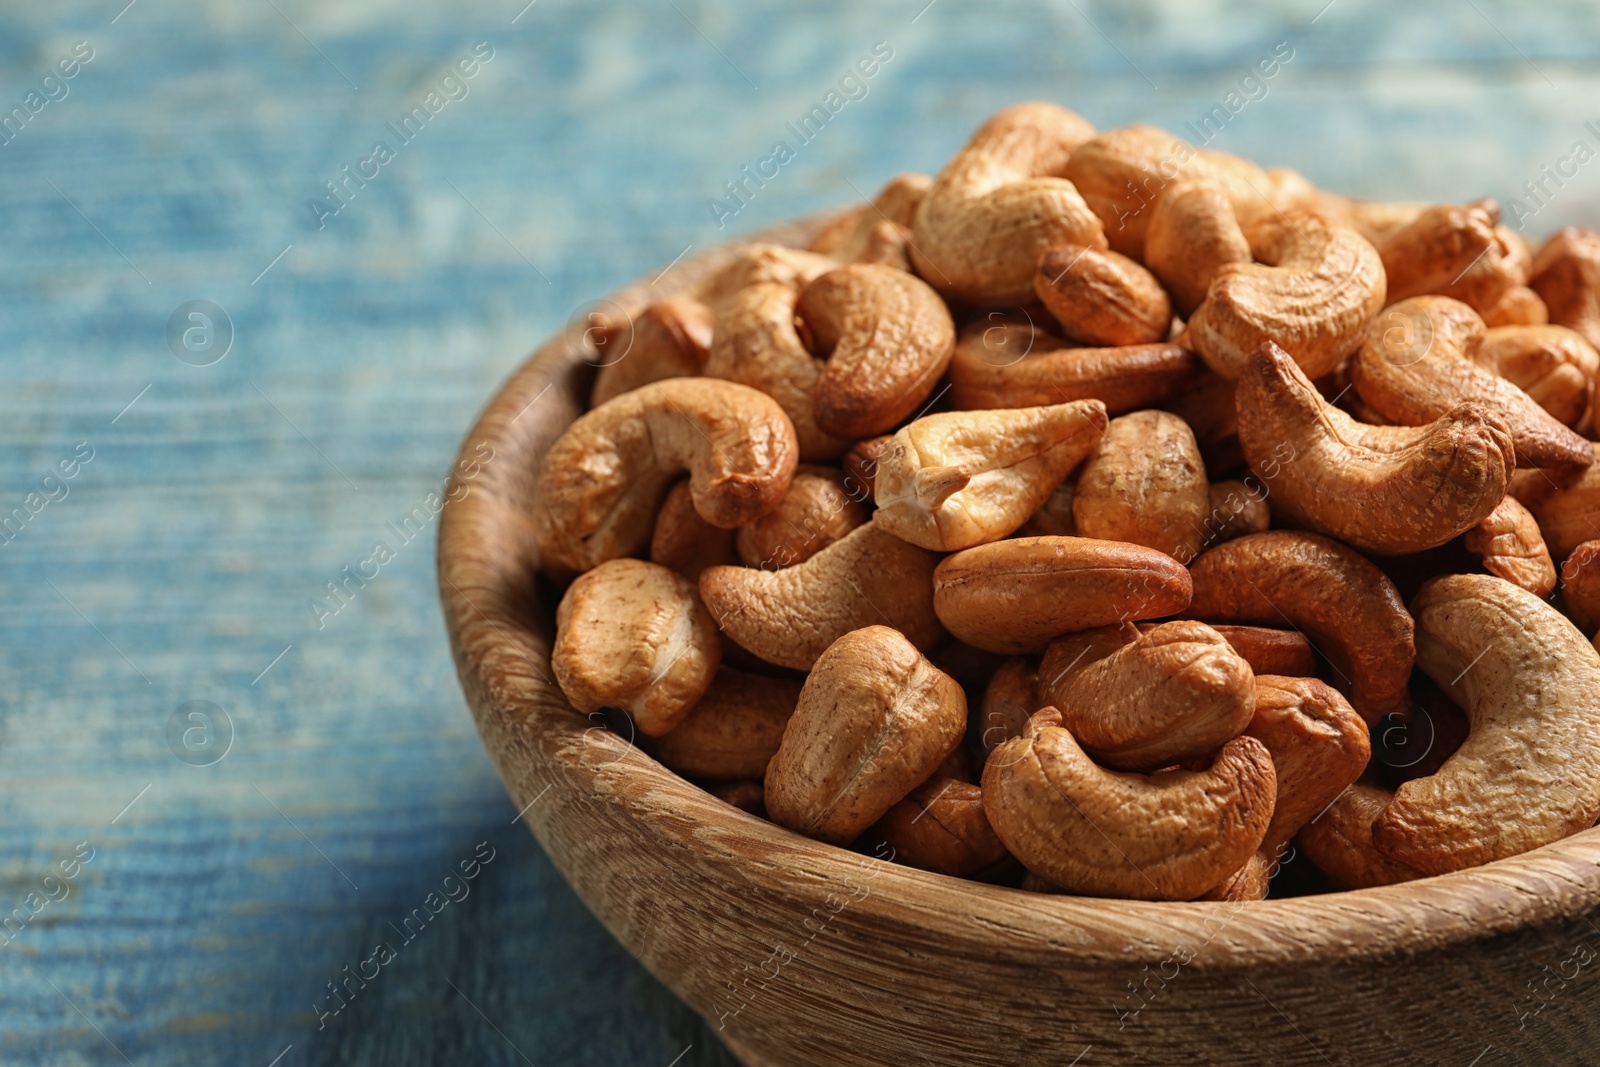 Photo of Tasty cashew nuts in bowl on table, closeup